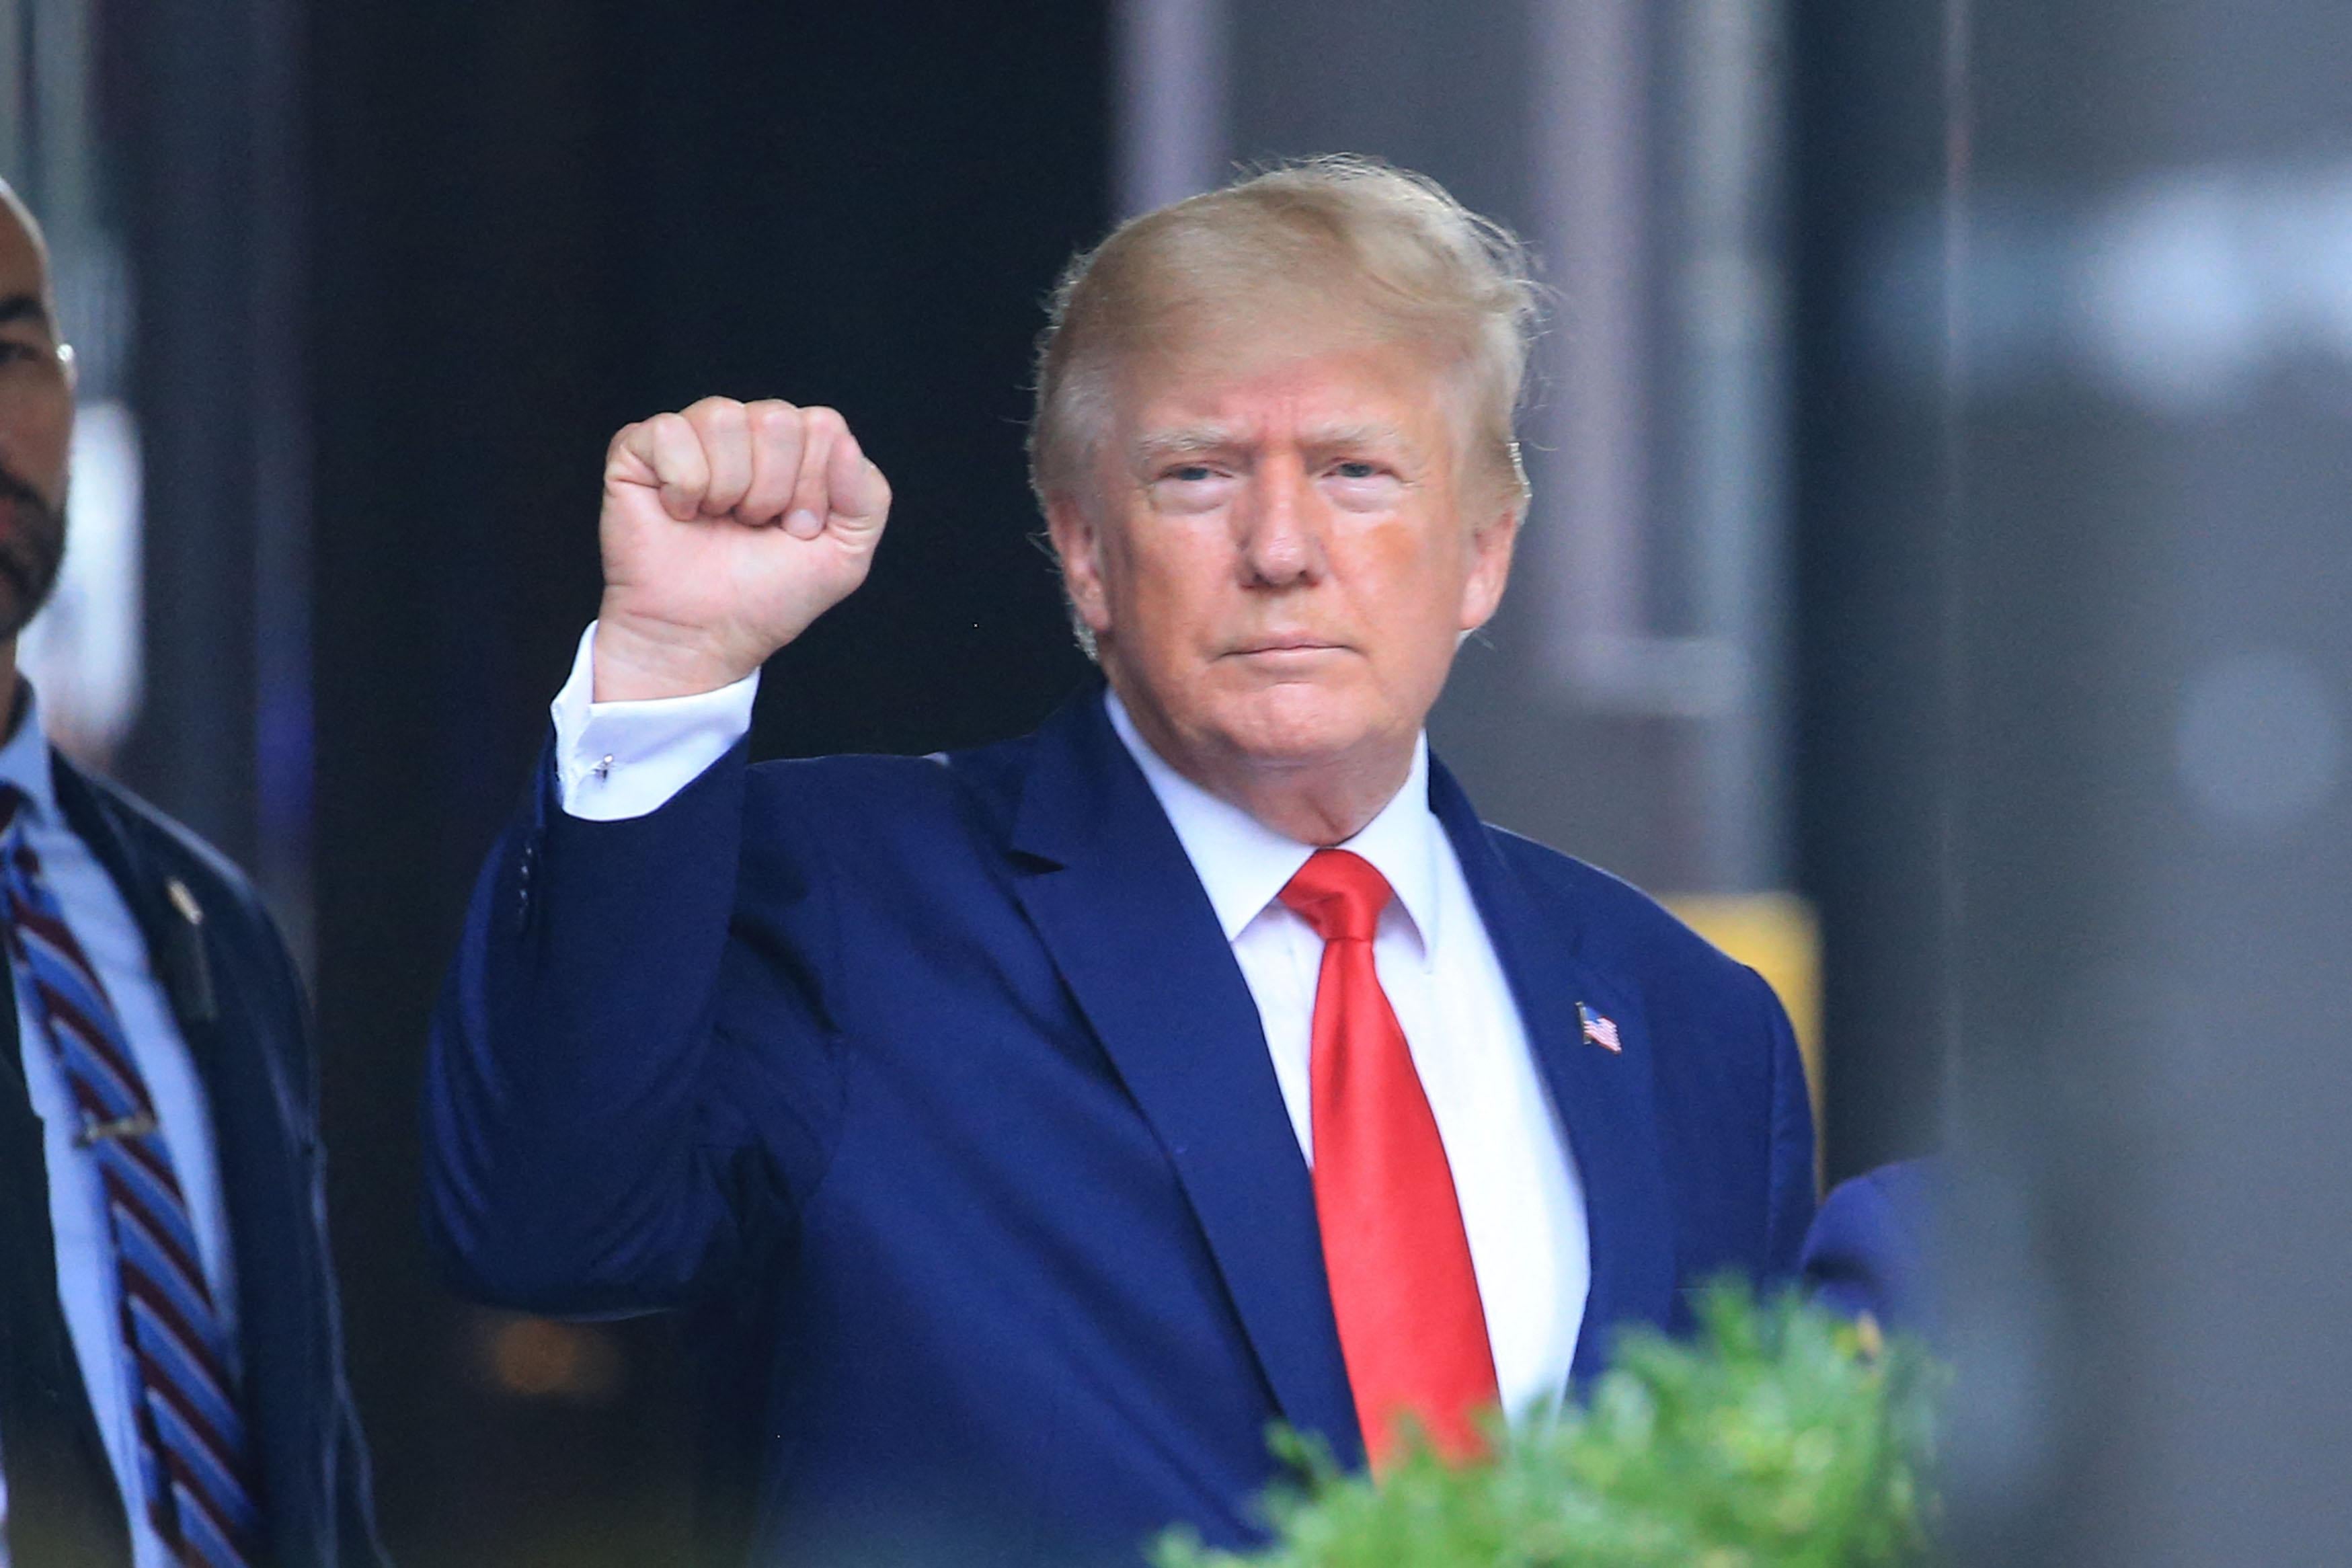 Trump with a frown raises his fist.